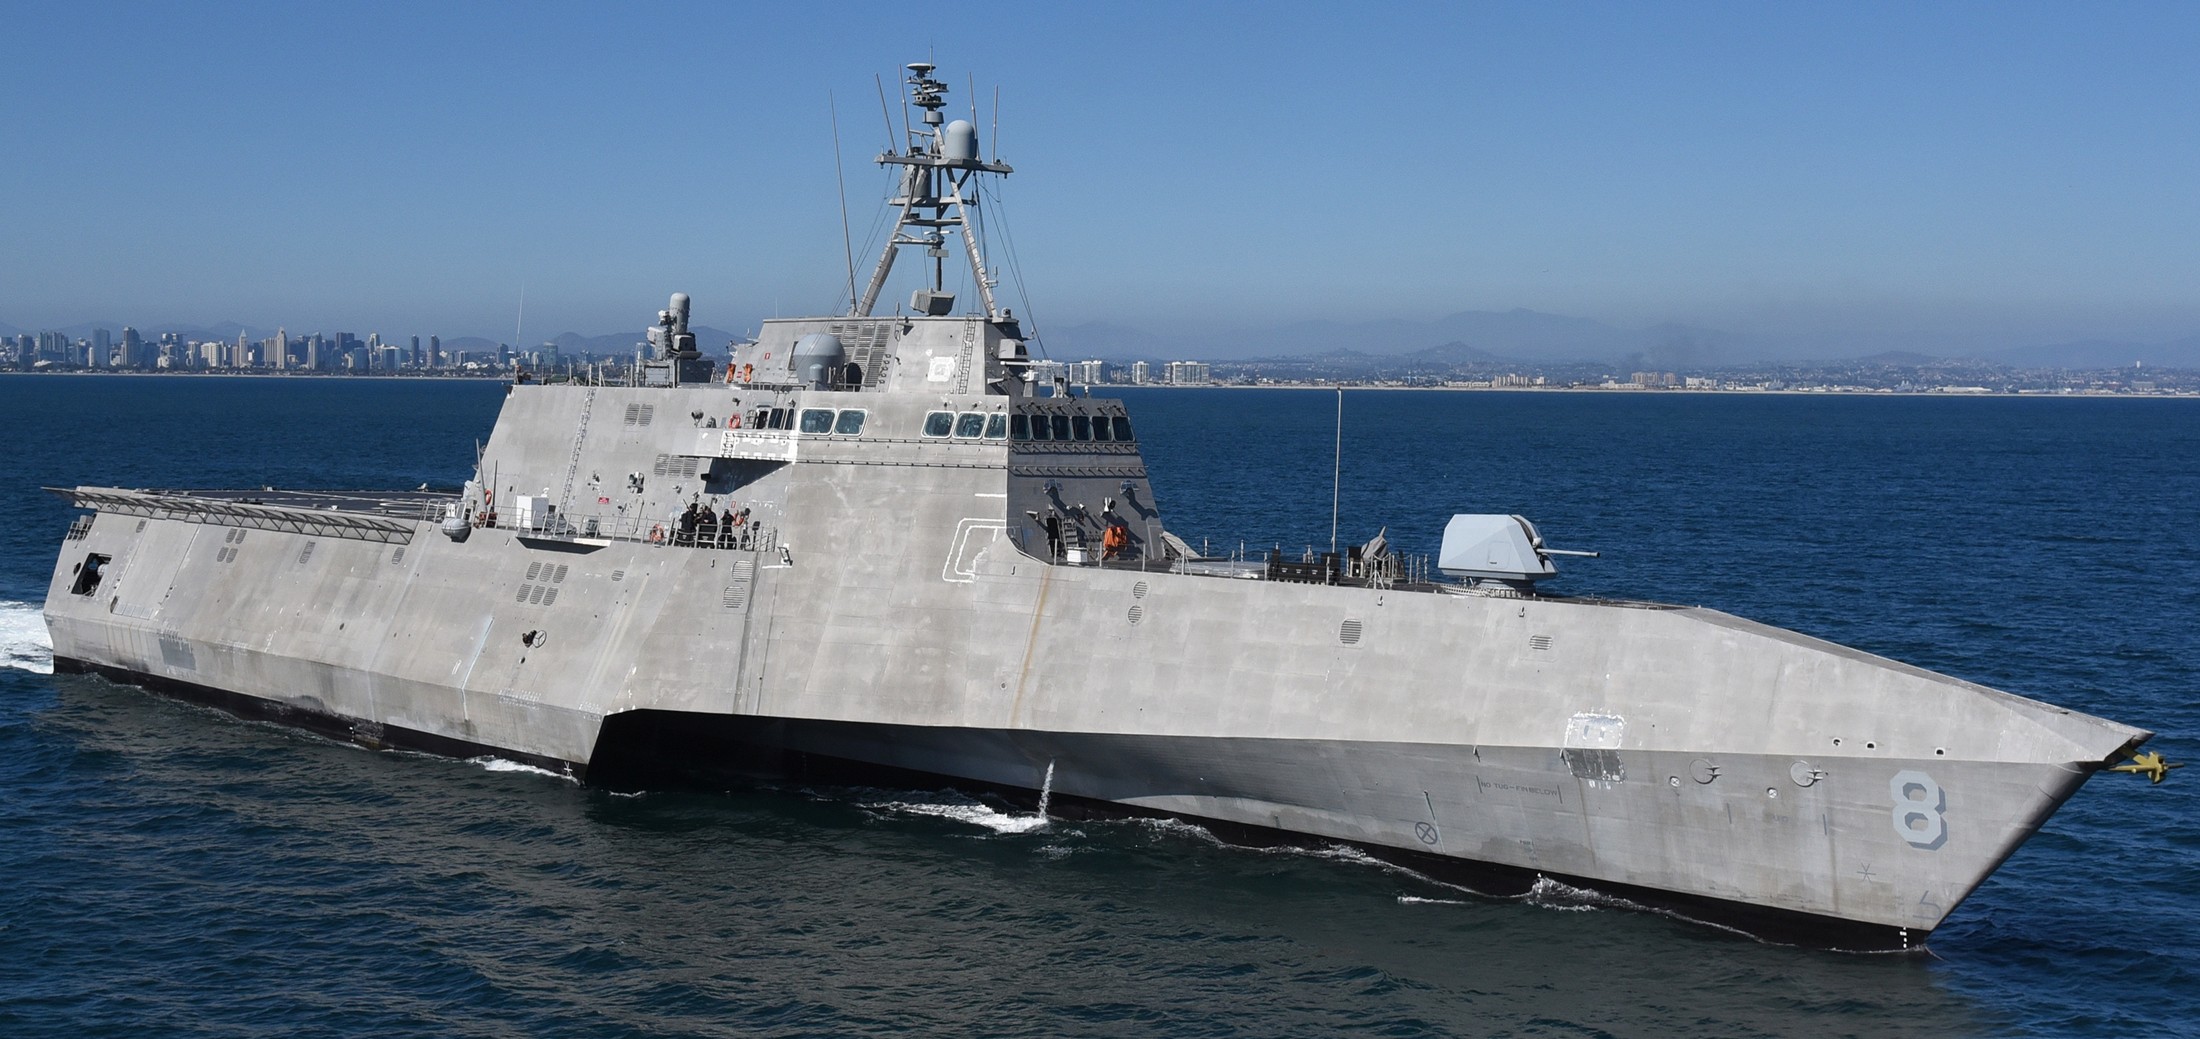 lcs-8 uss montgomery independence class littoral combat ship us navy 52 san diego naval base california